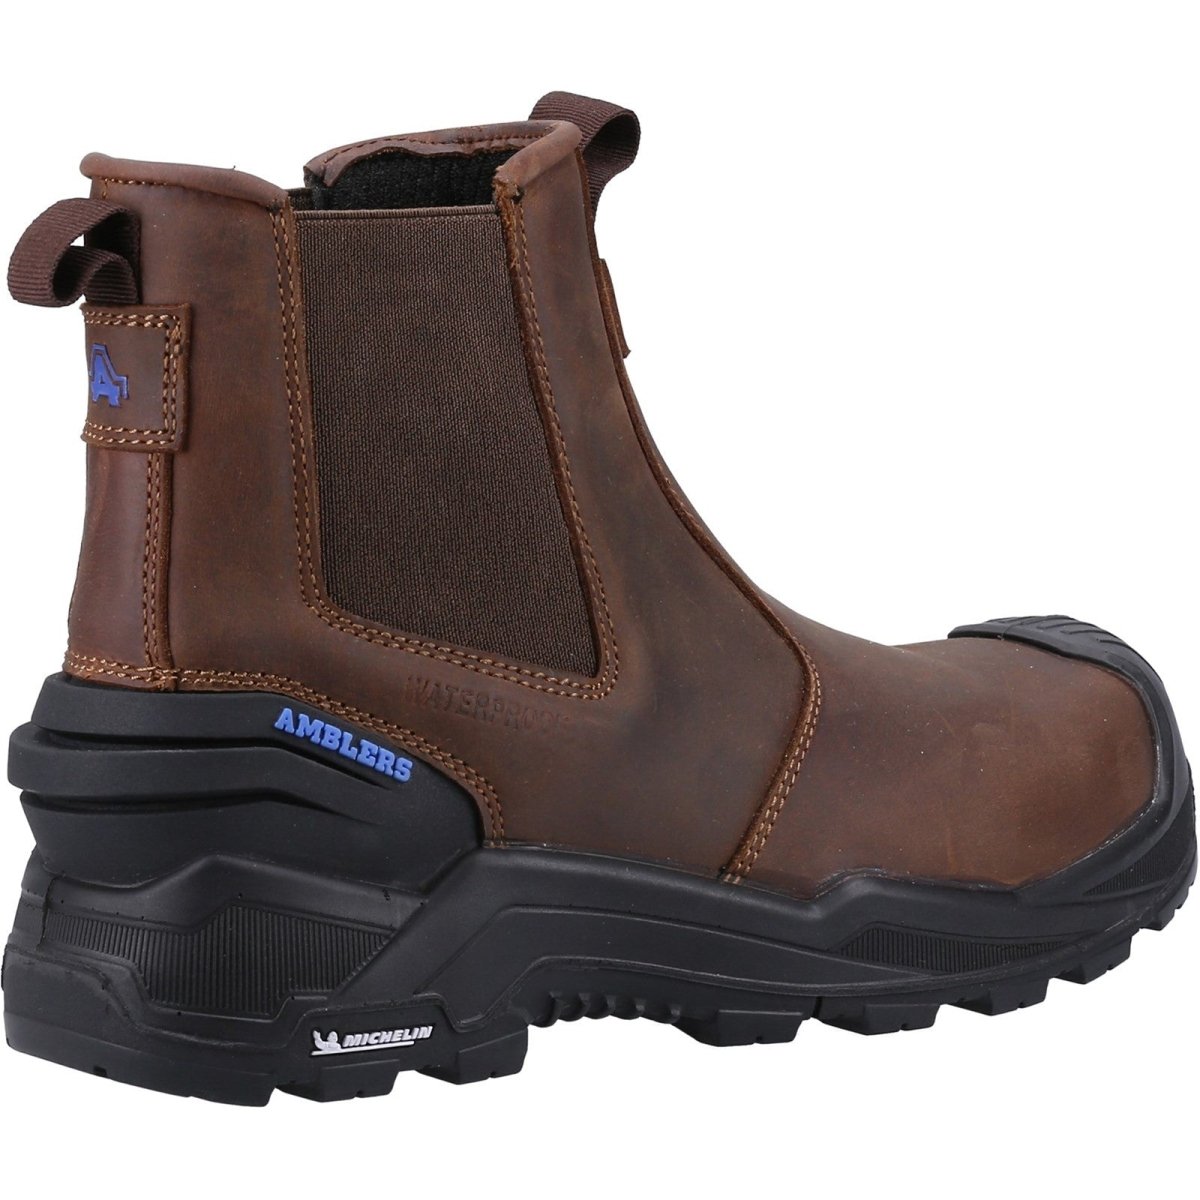 Amblers AS982C Conway S7 Waterproof Safety Dealer Boot - Shoe Store Direct